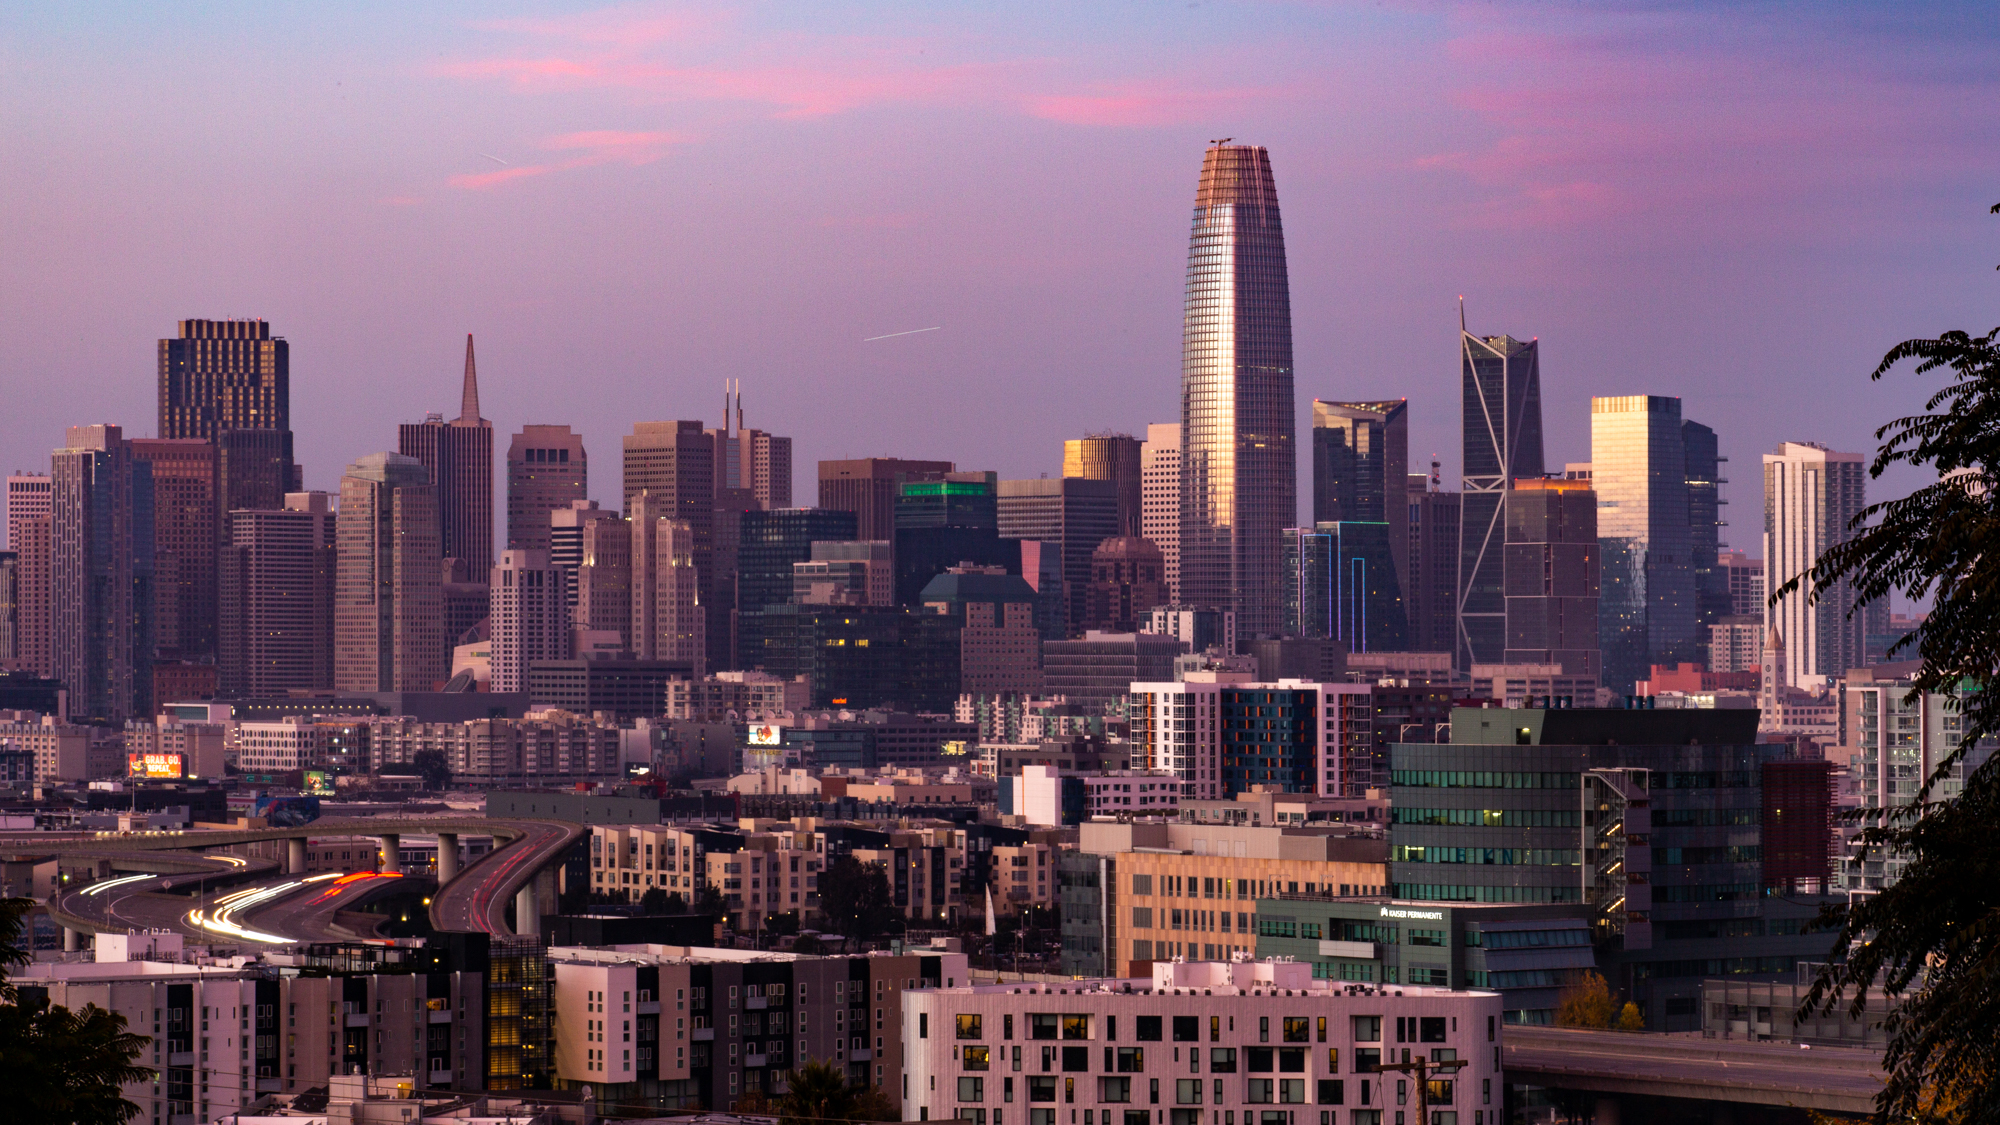 Salesforce Tower in the city skyline, image by Andrew Campbell Nelson